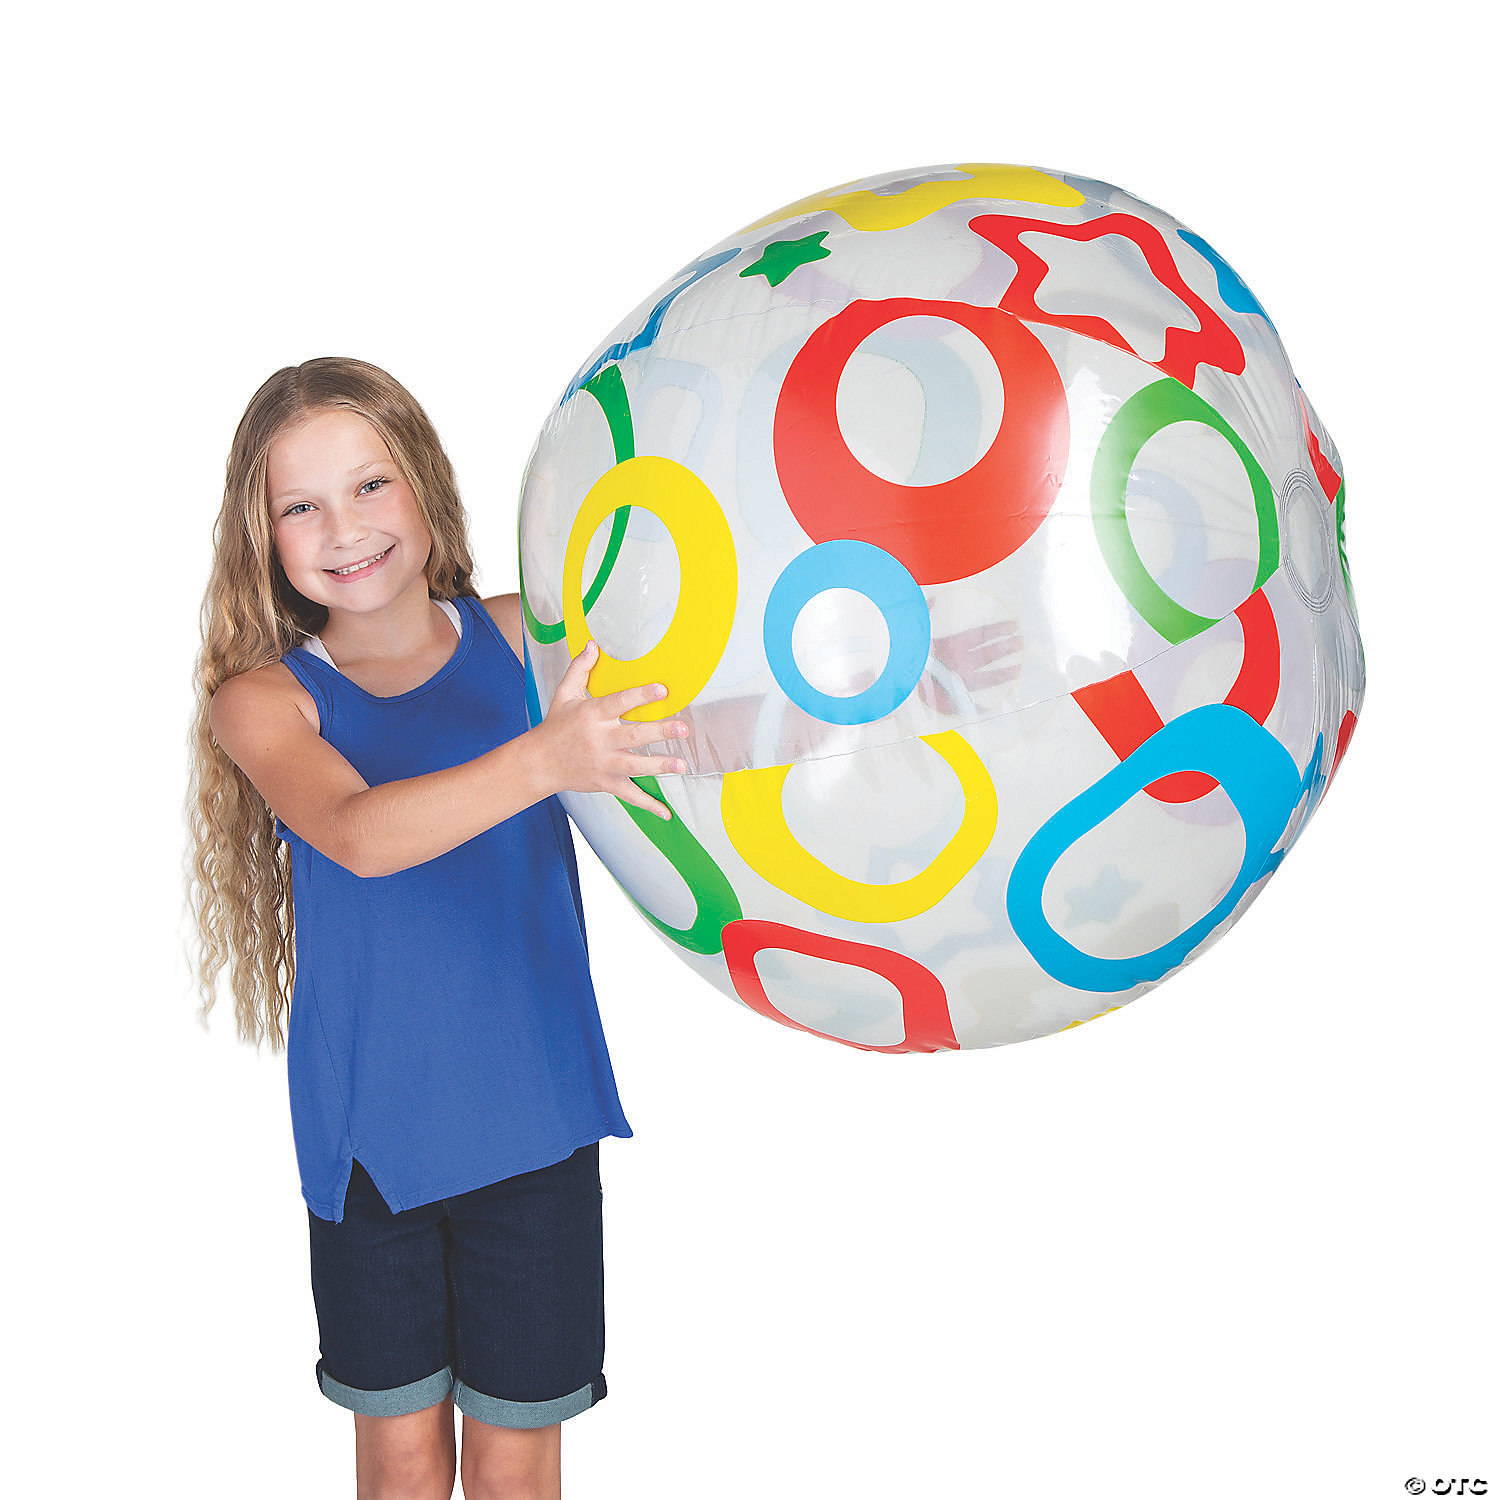 9 NEW LARGE INFLATABLE MULTI COLORED BEACH BALLS 22" POOL BEACHBALL PARTY FAVOR